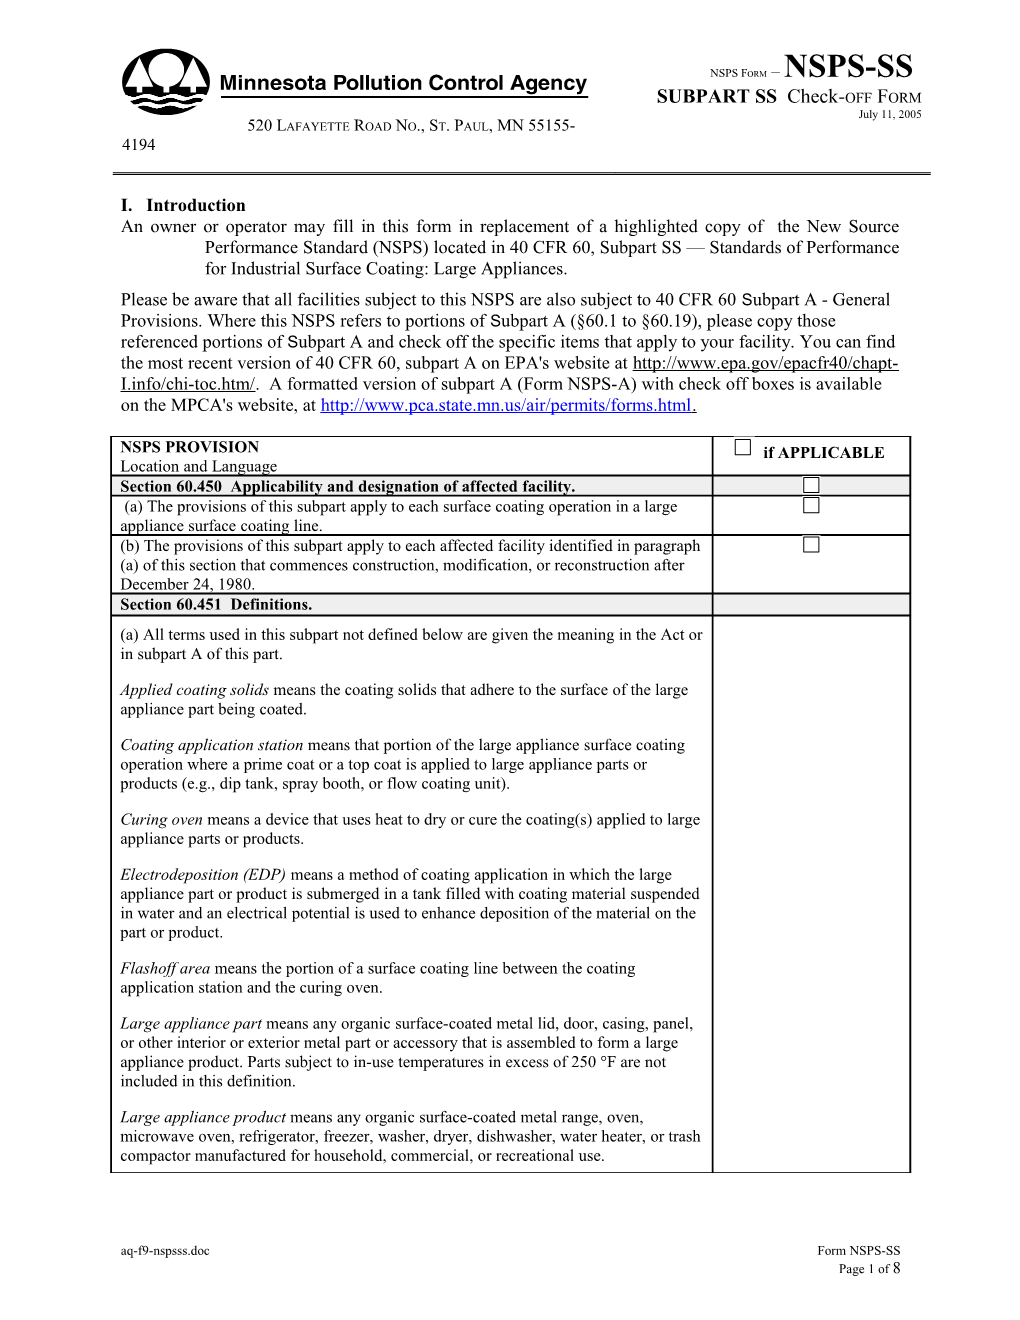 An Owner Or Operator May Fill in This Form in Replacement of a Highlighted Copy of The